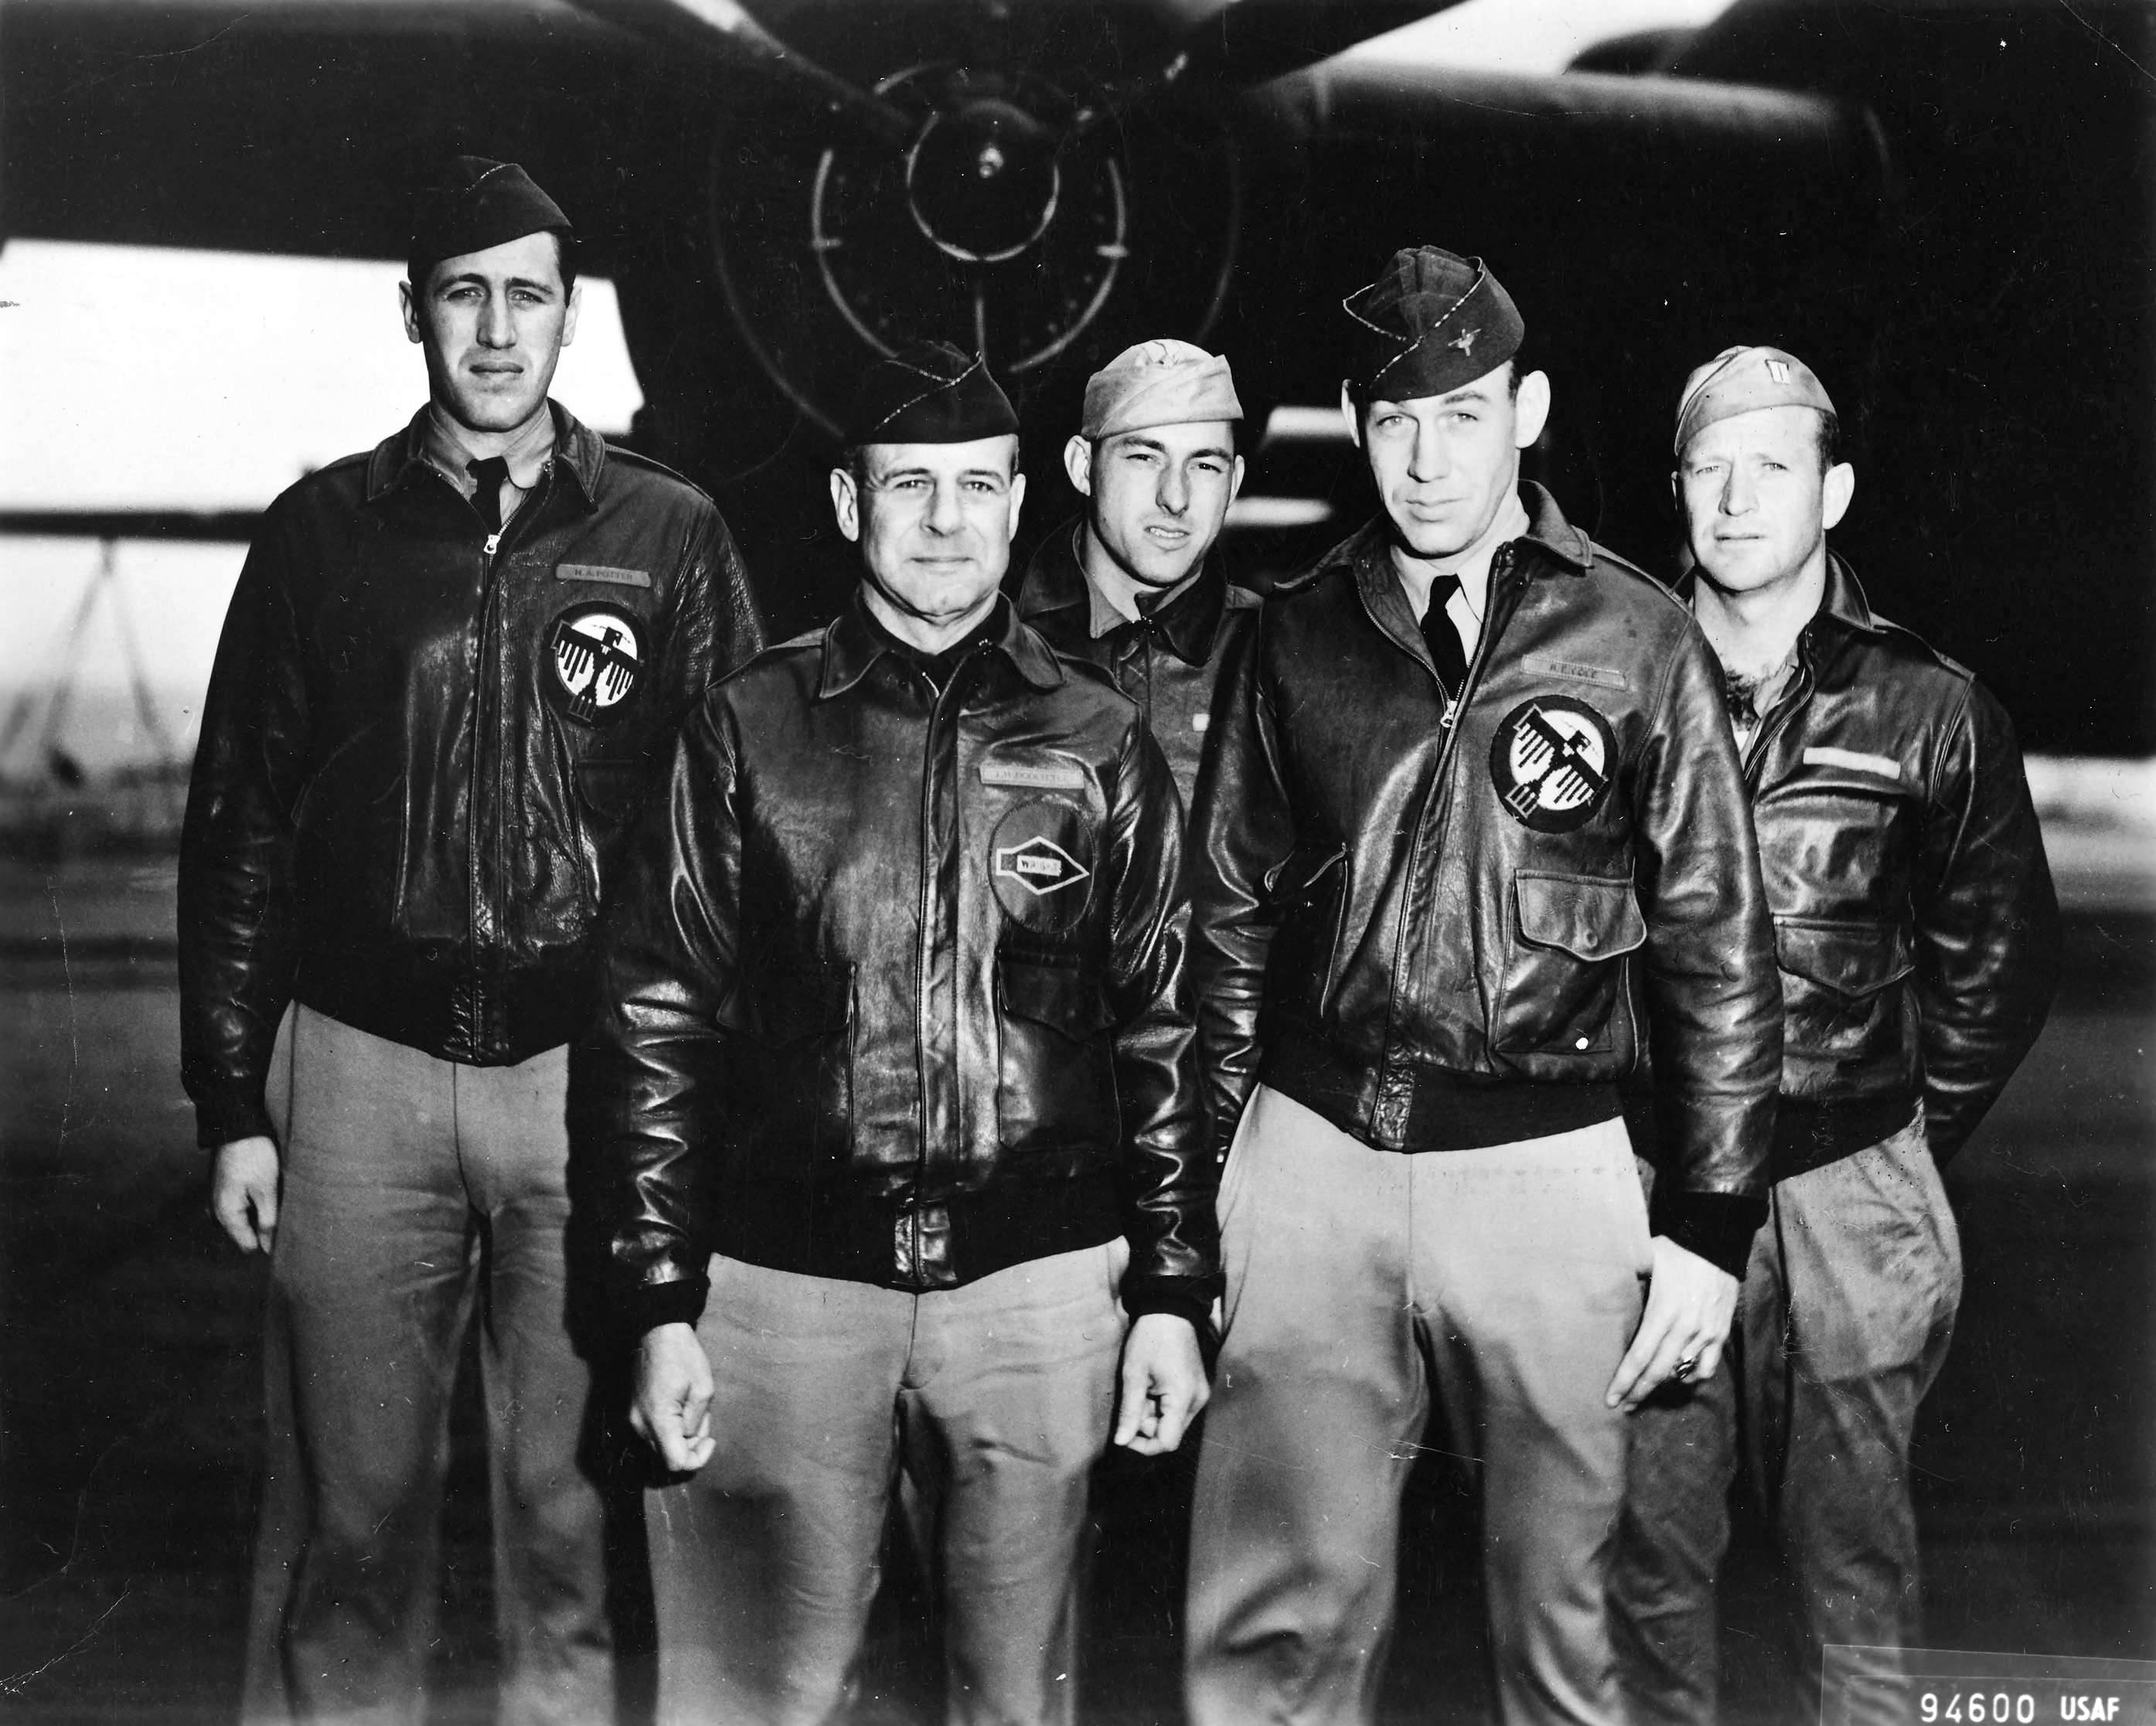 James Doolittle with his crew shortly before the Doolittle Raid against Japan, Apr 1942